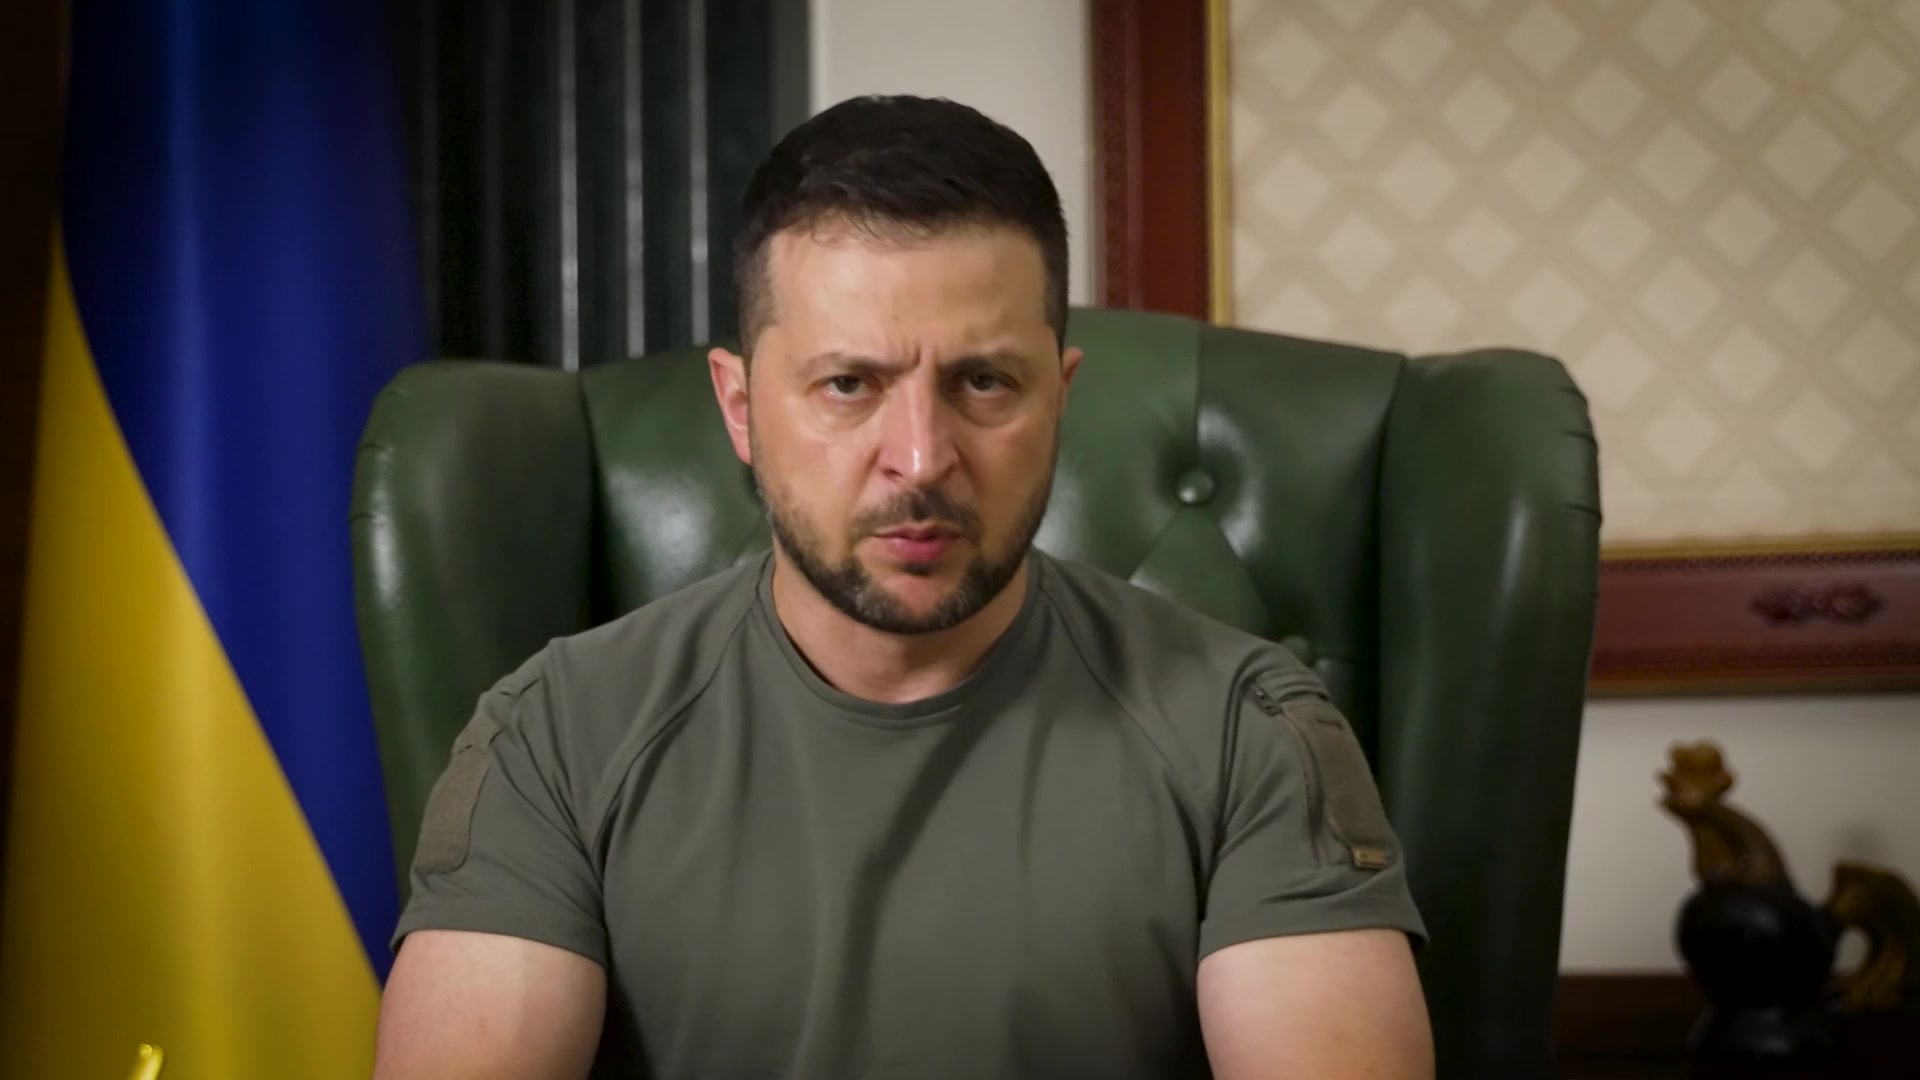 Volodymyr Zelensky, the president of Ukraine, has Russian troops out of his country this winter 